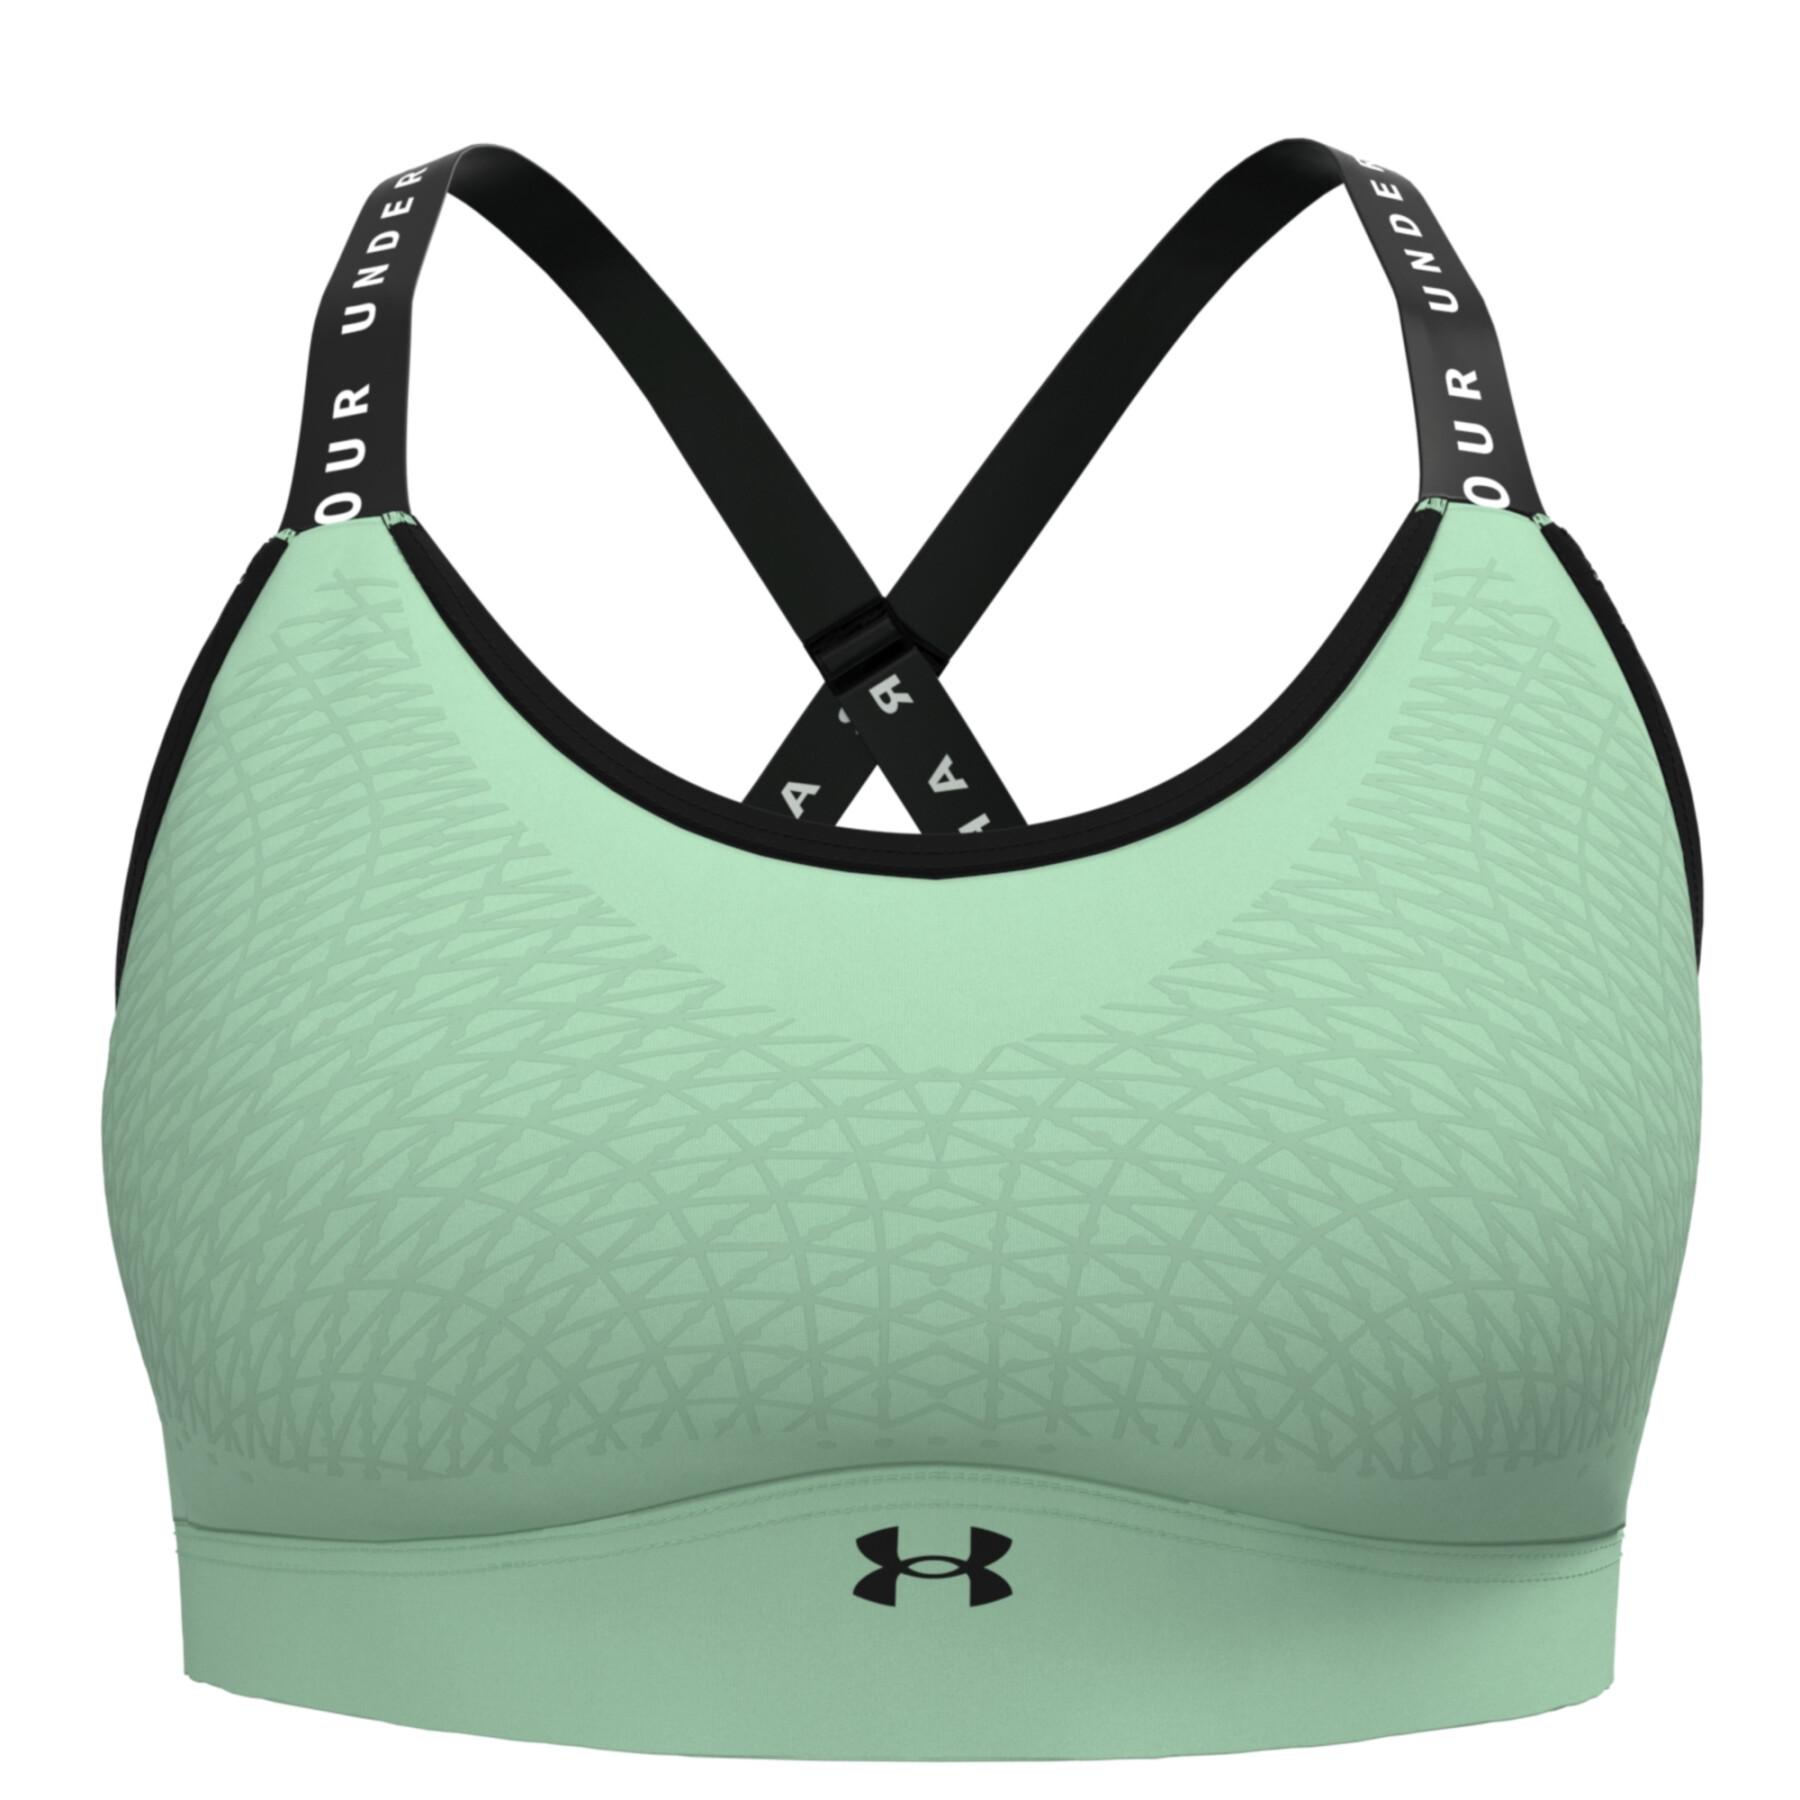 Buy Under Armour Women's Armour Mid Sports Bra, Stealth Gray/Black